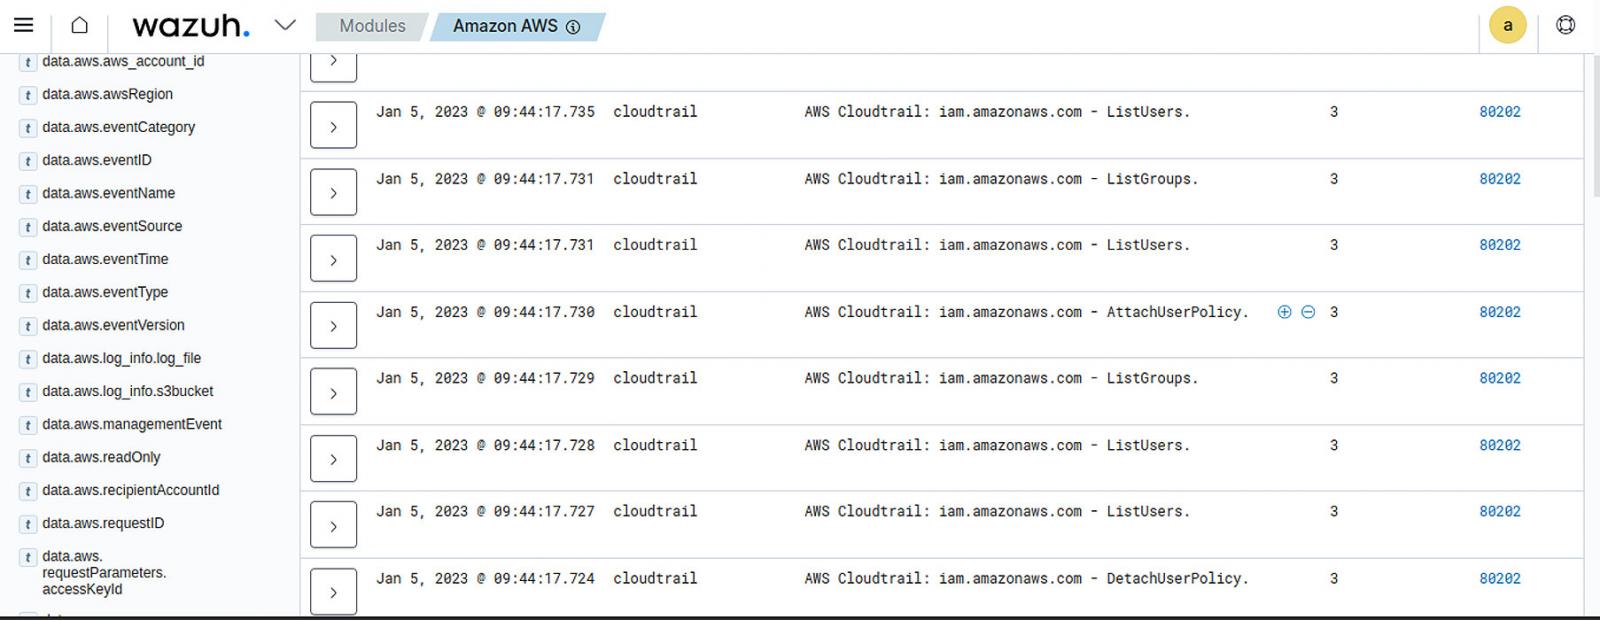 The Wazuh dashboard showing AWS CloudTrail events